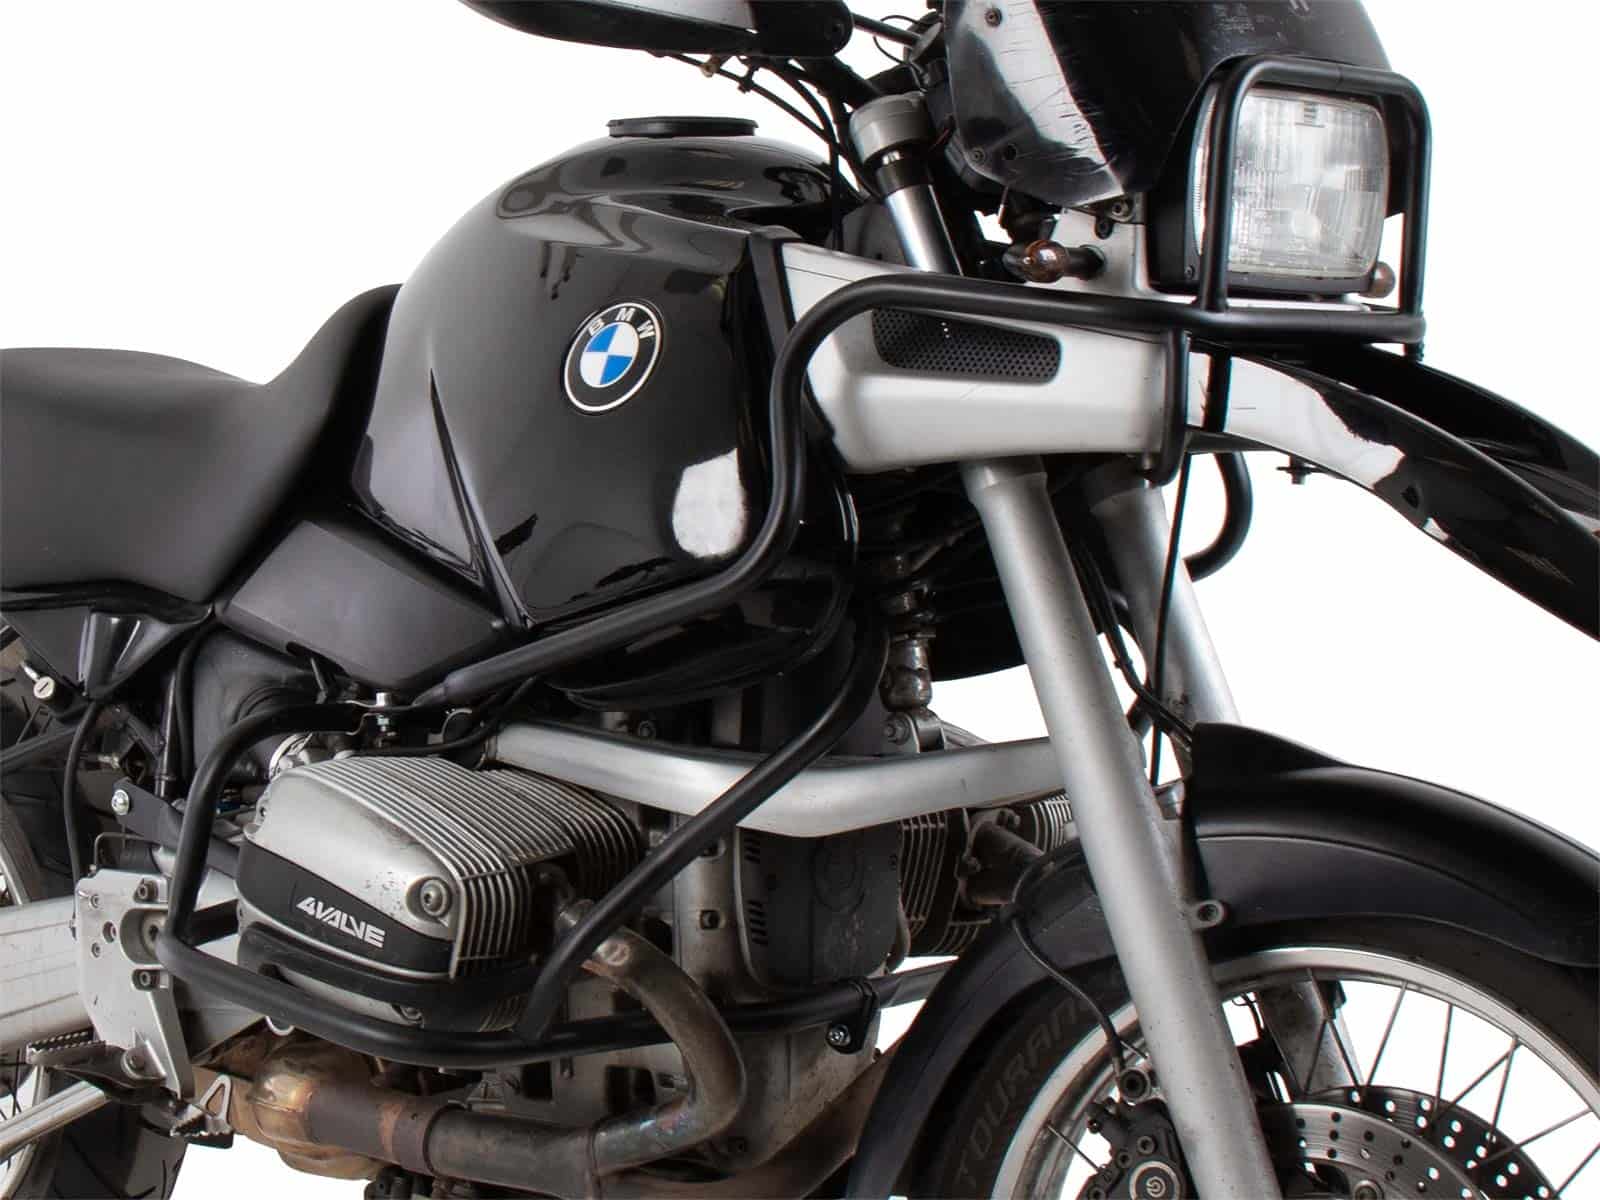 Engine protection bar black for BMW R 850 GS (1998-2000)/R 1100 GS (1994-1999) *please state year of constrution*